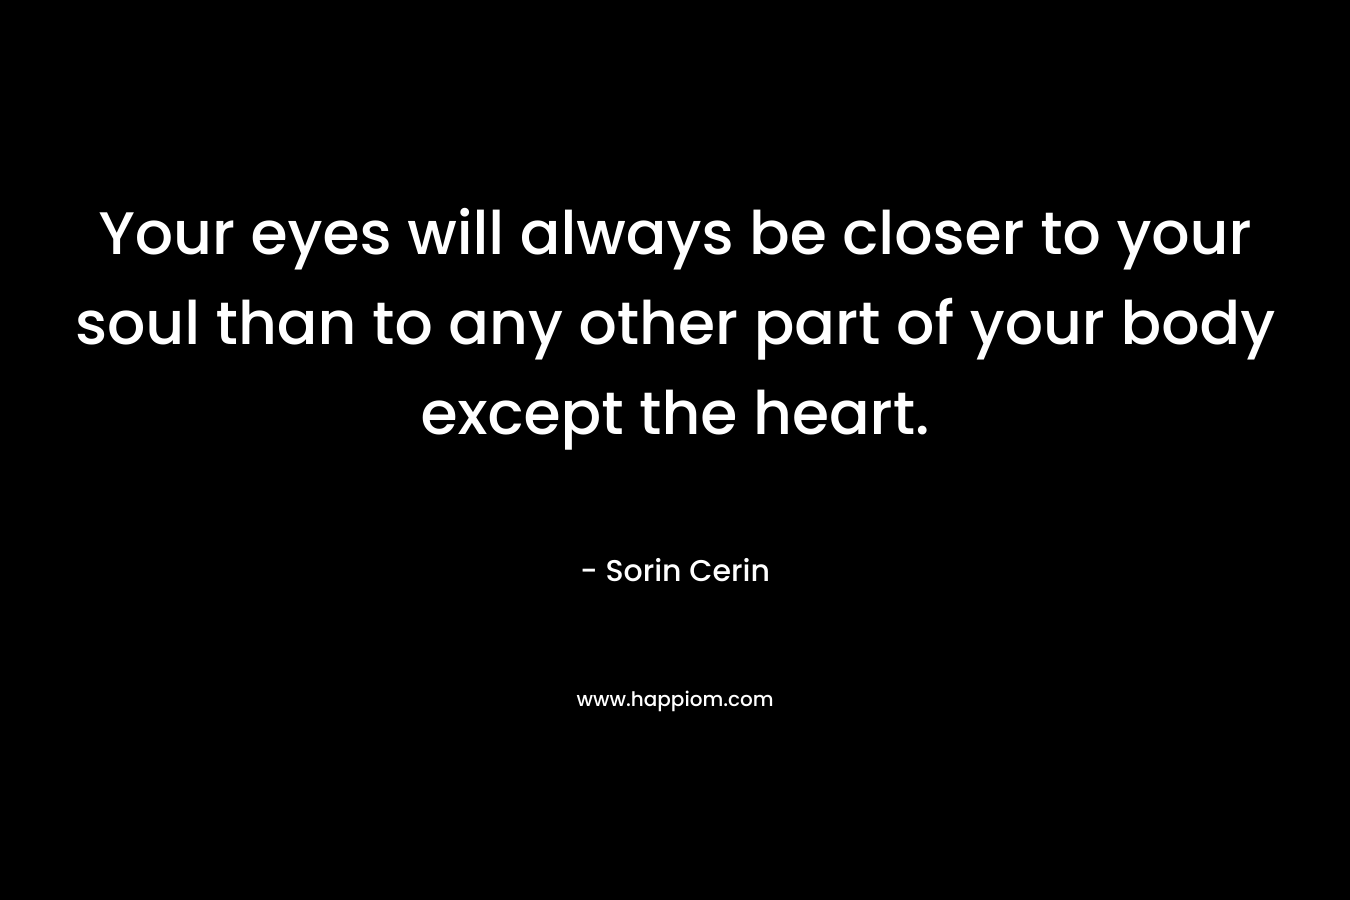 Your eyes will always be closer to your soul than to any other part of your body except the heart. – Sorin Cerin